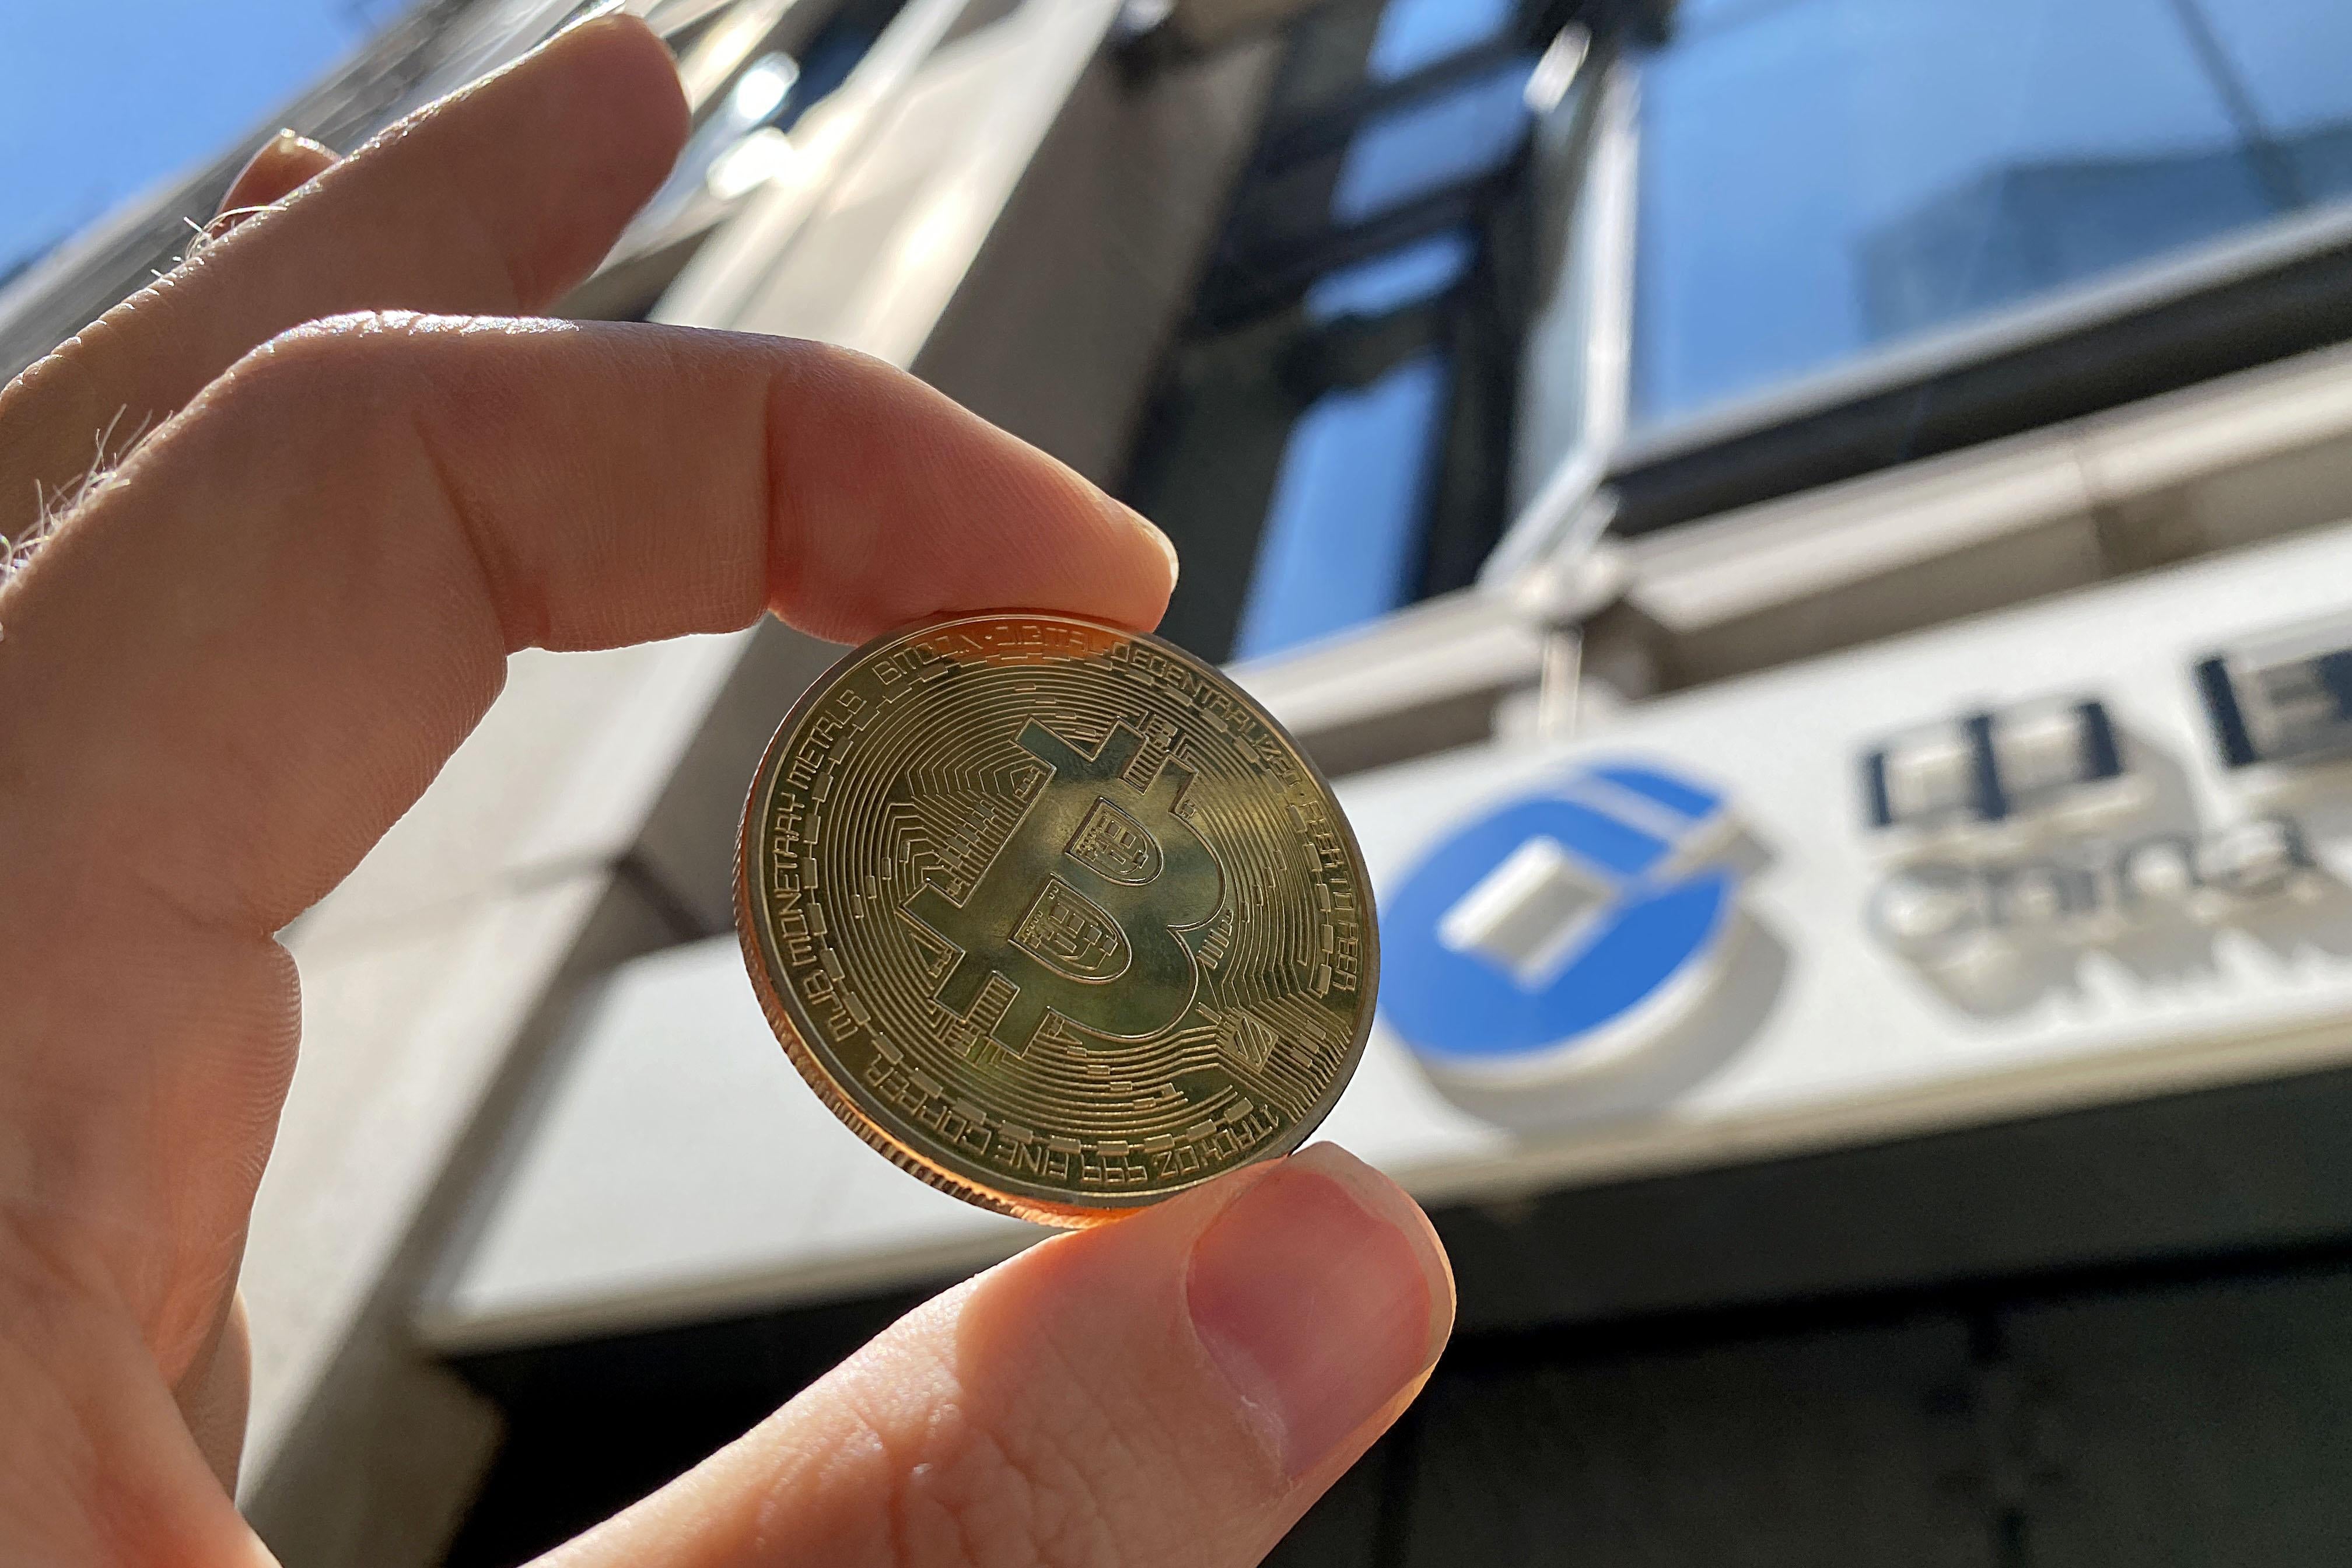 A visual representation of Bitcoin cryptocurrency as a coin. 